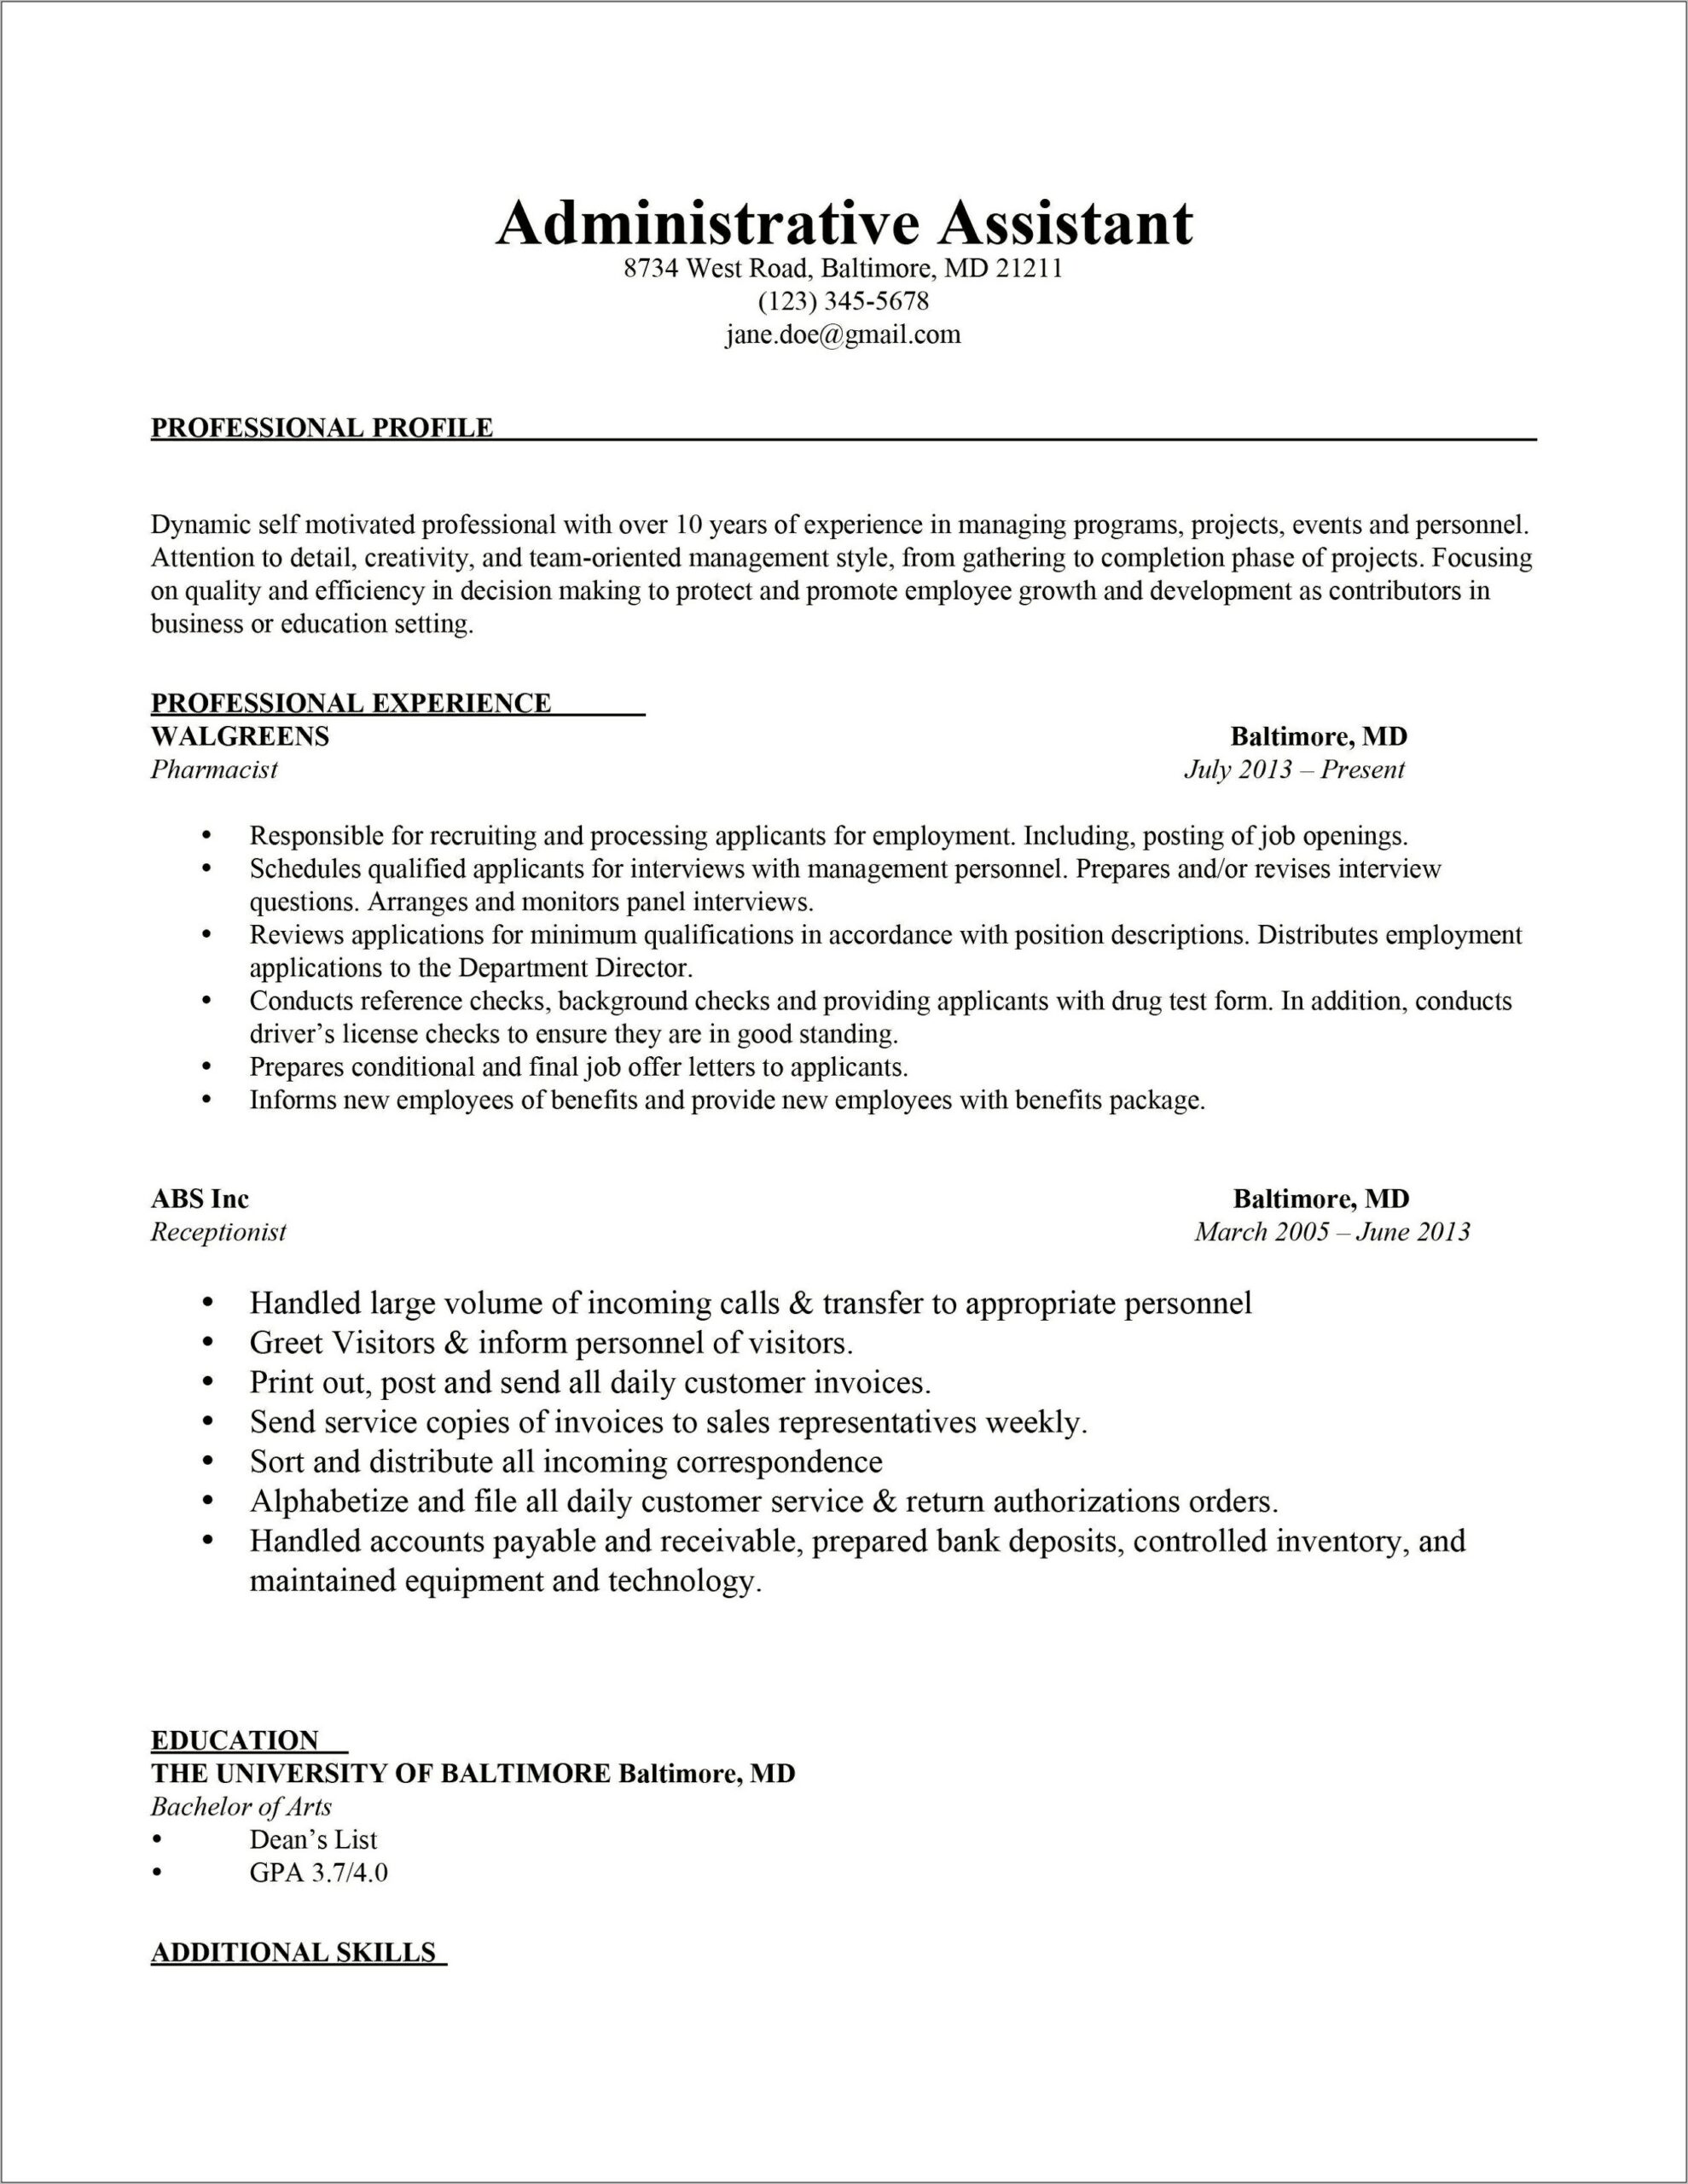 Resume Of A Assistant Manager At Walgreens